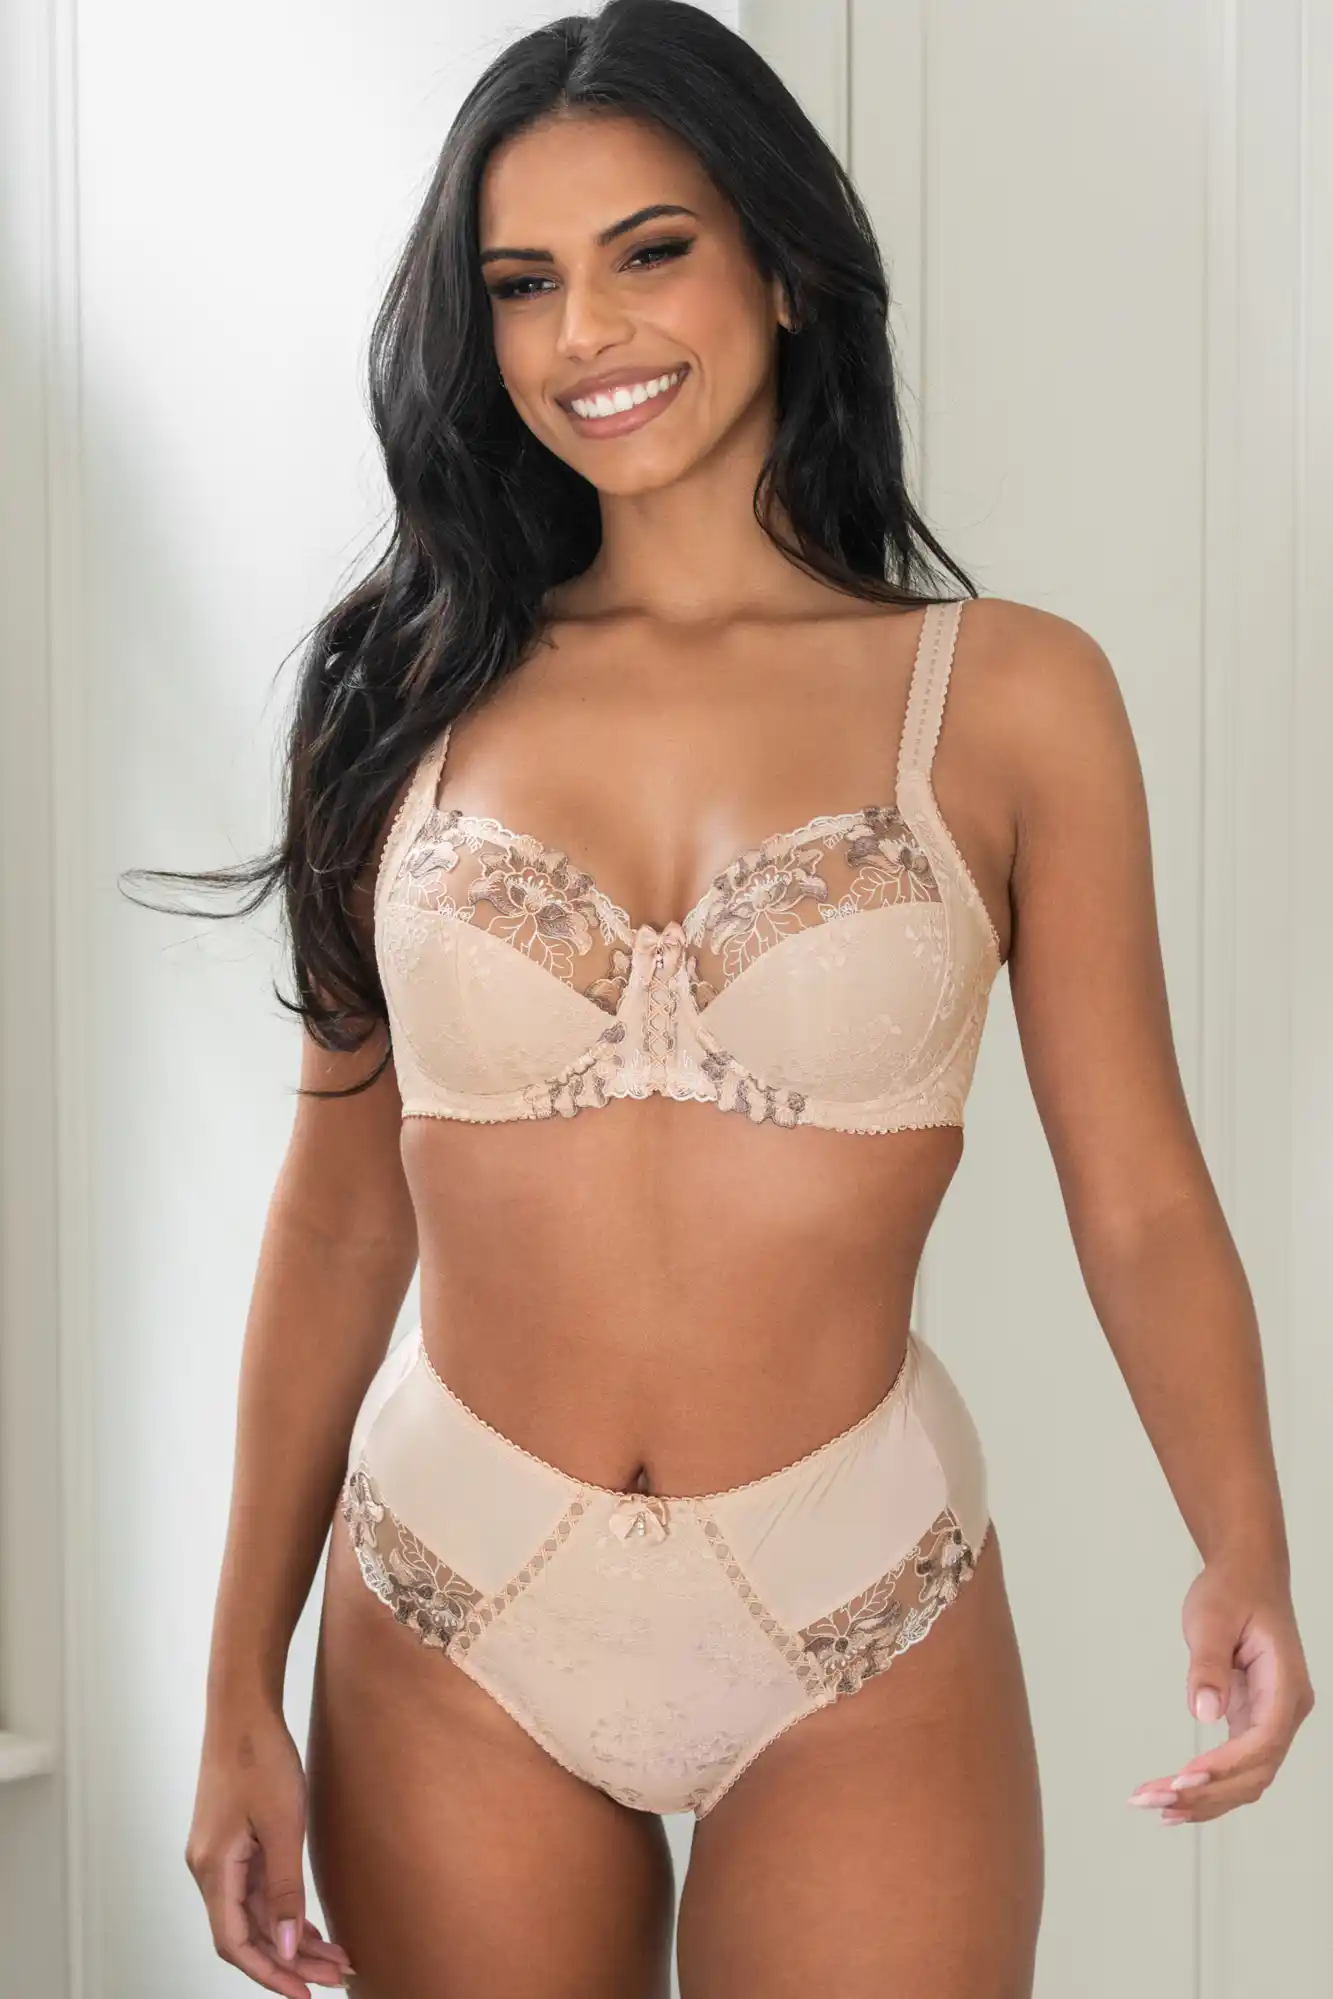 Women's Embroidery Bras Set Lace Lingerie Bra and Panties